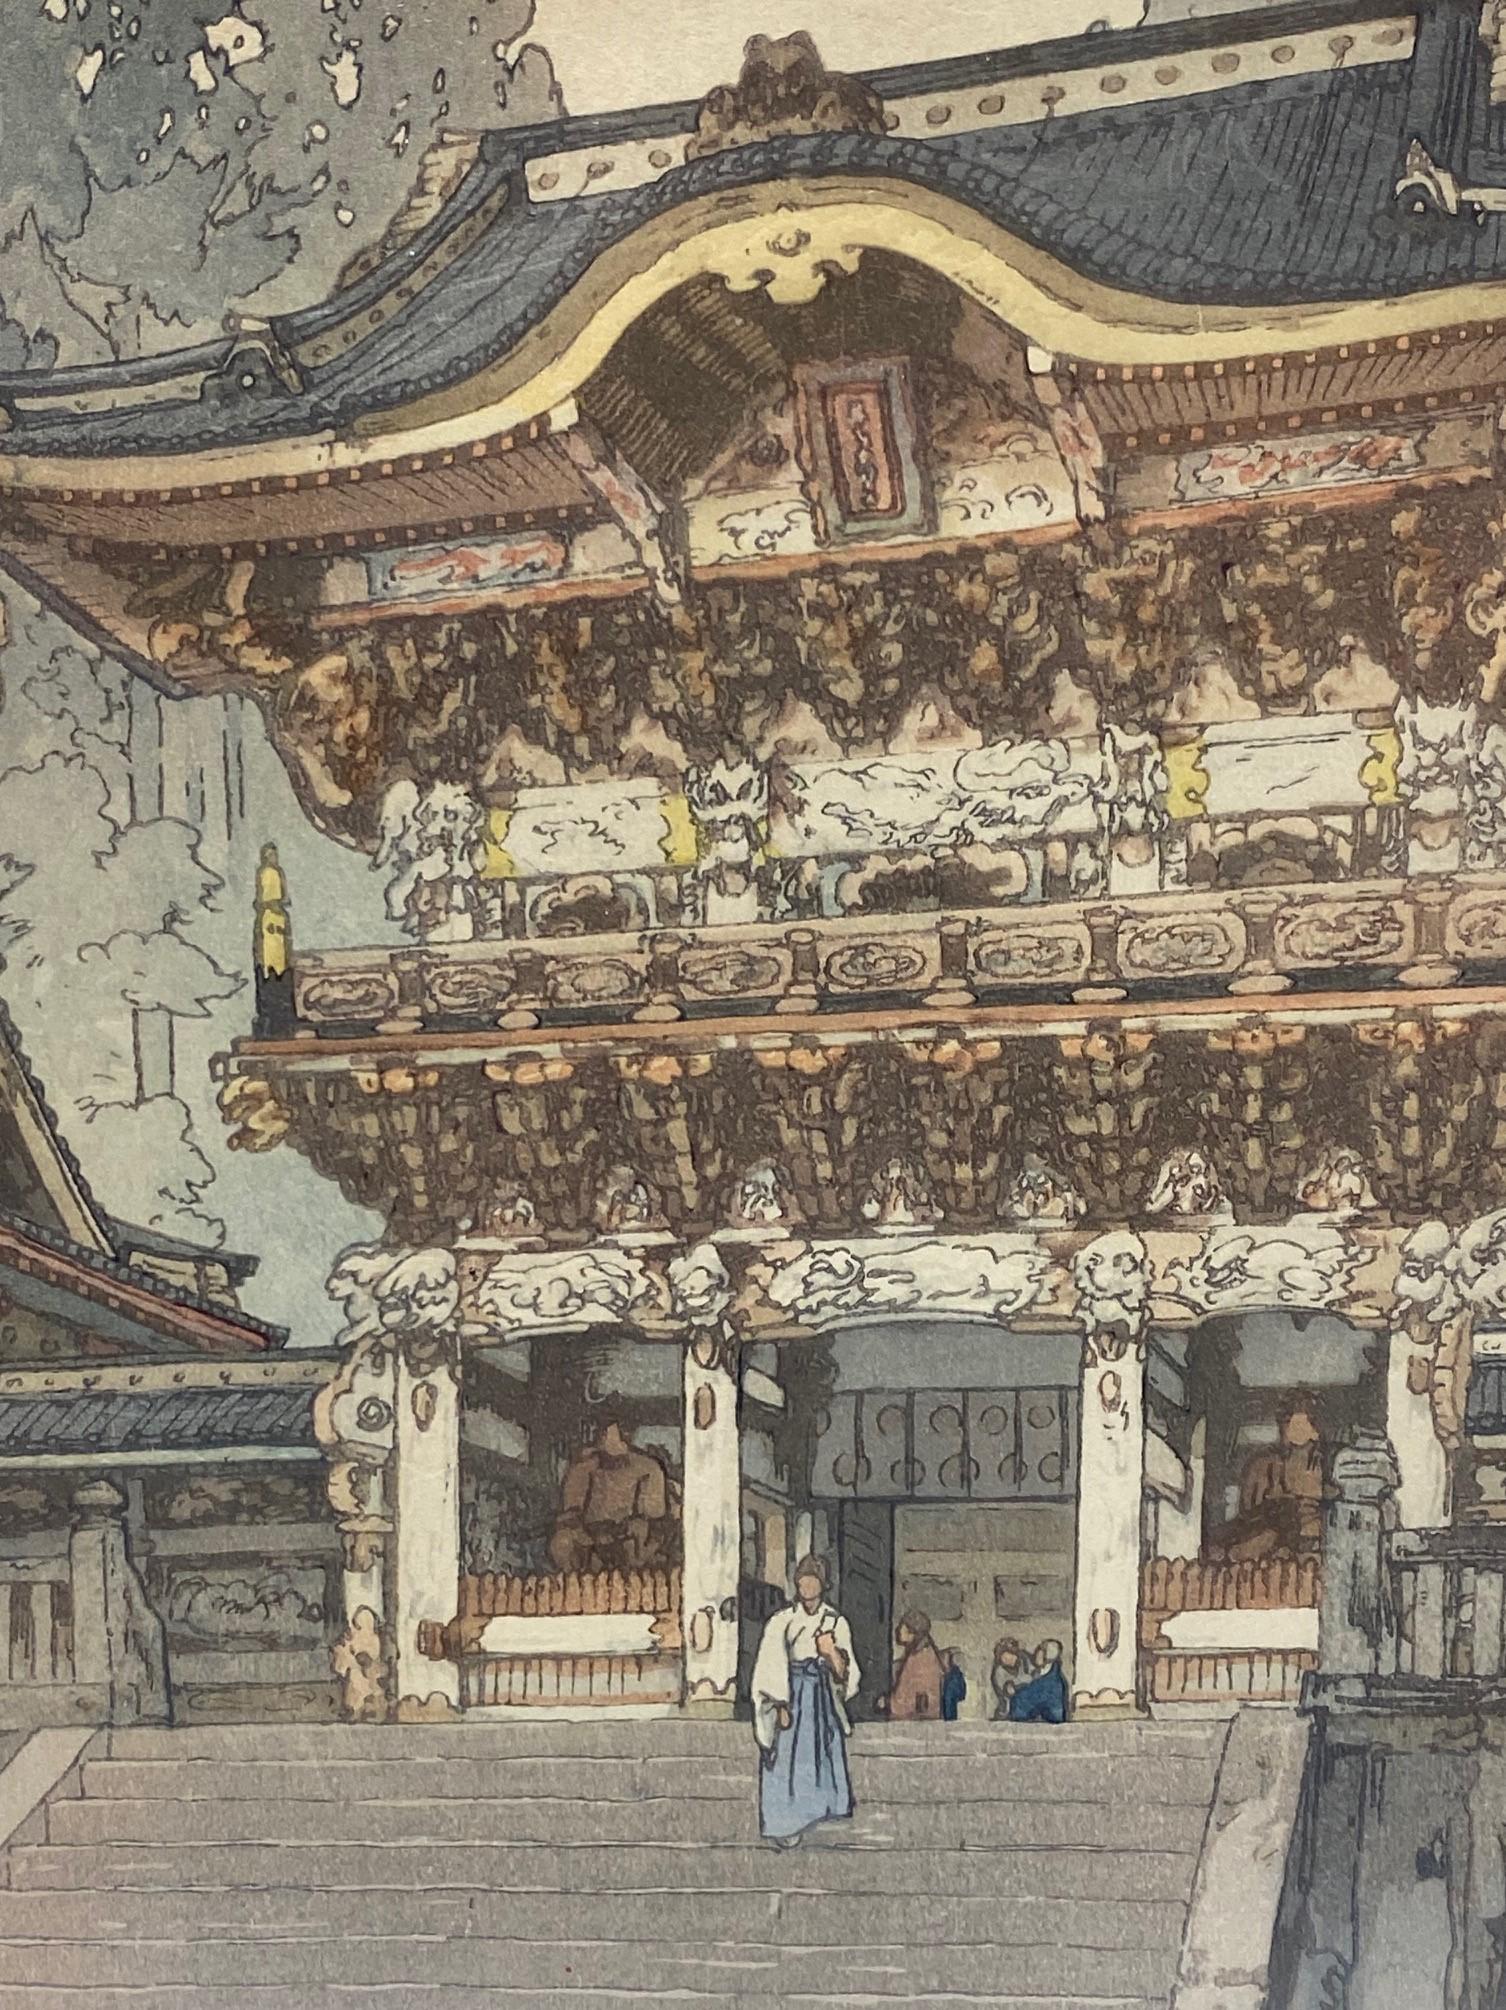 Hiroshi Yoshida Signed & Sealed Framed Japanese Woodblock Print Yomei Gate In Good Condition For Sale In Studio City, CA